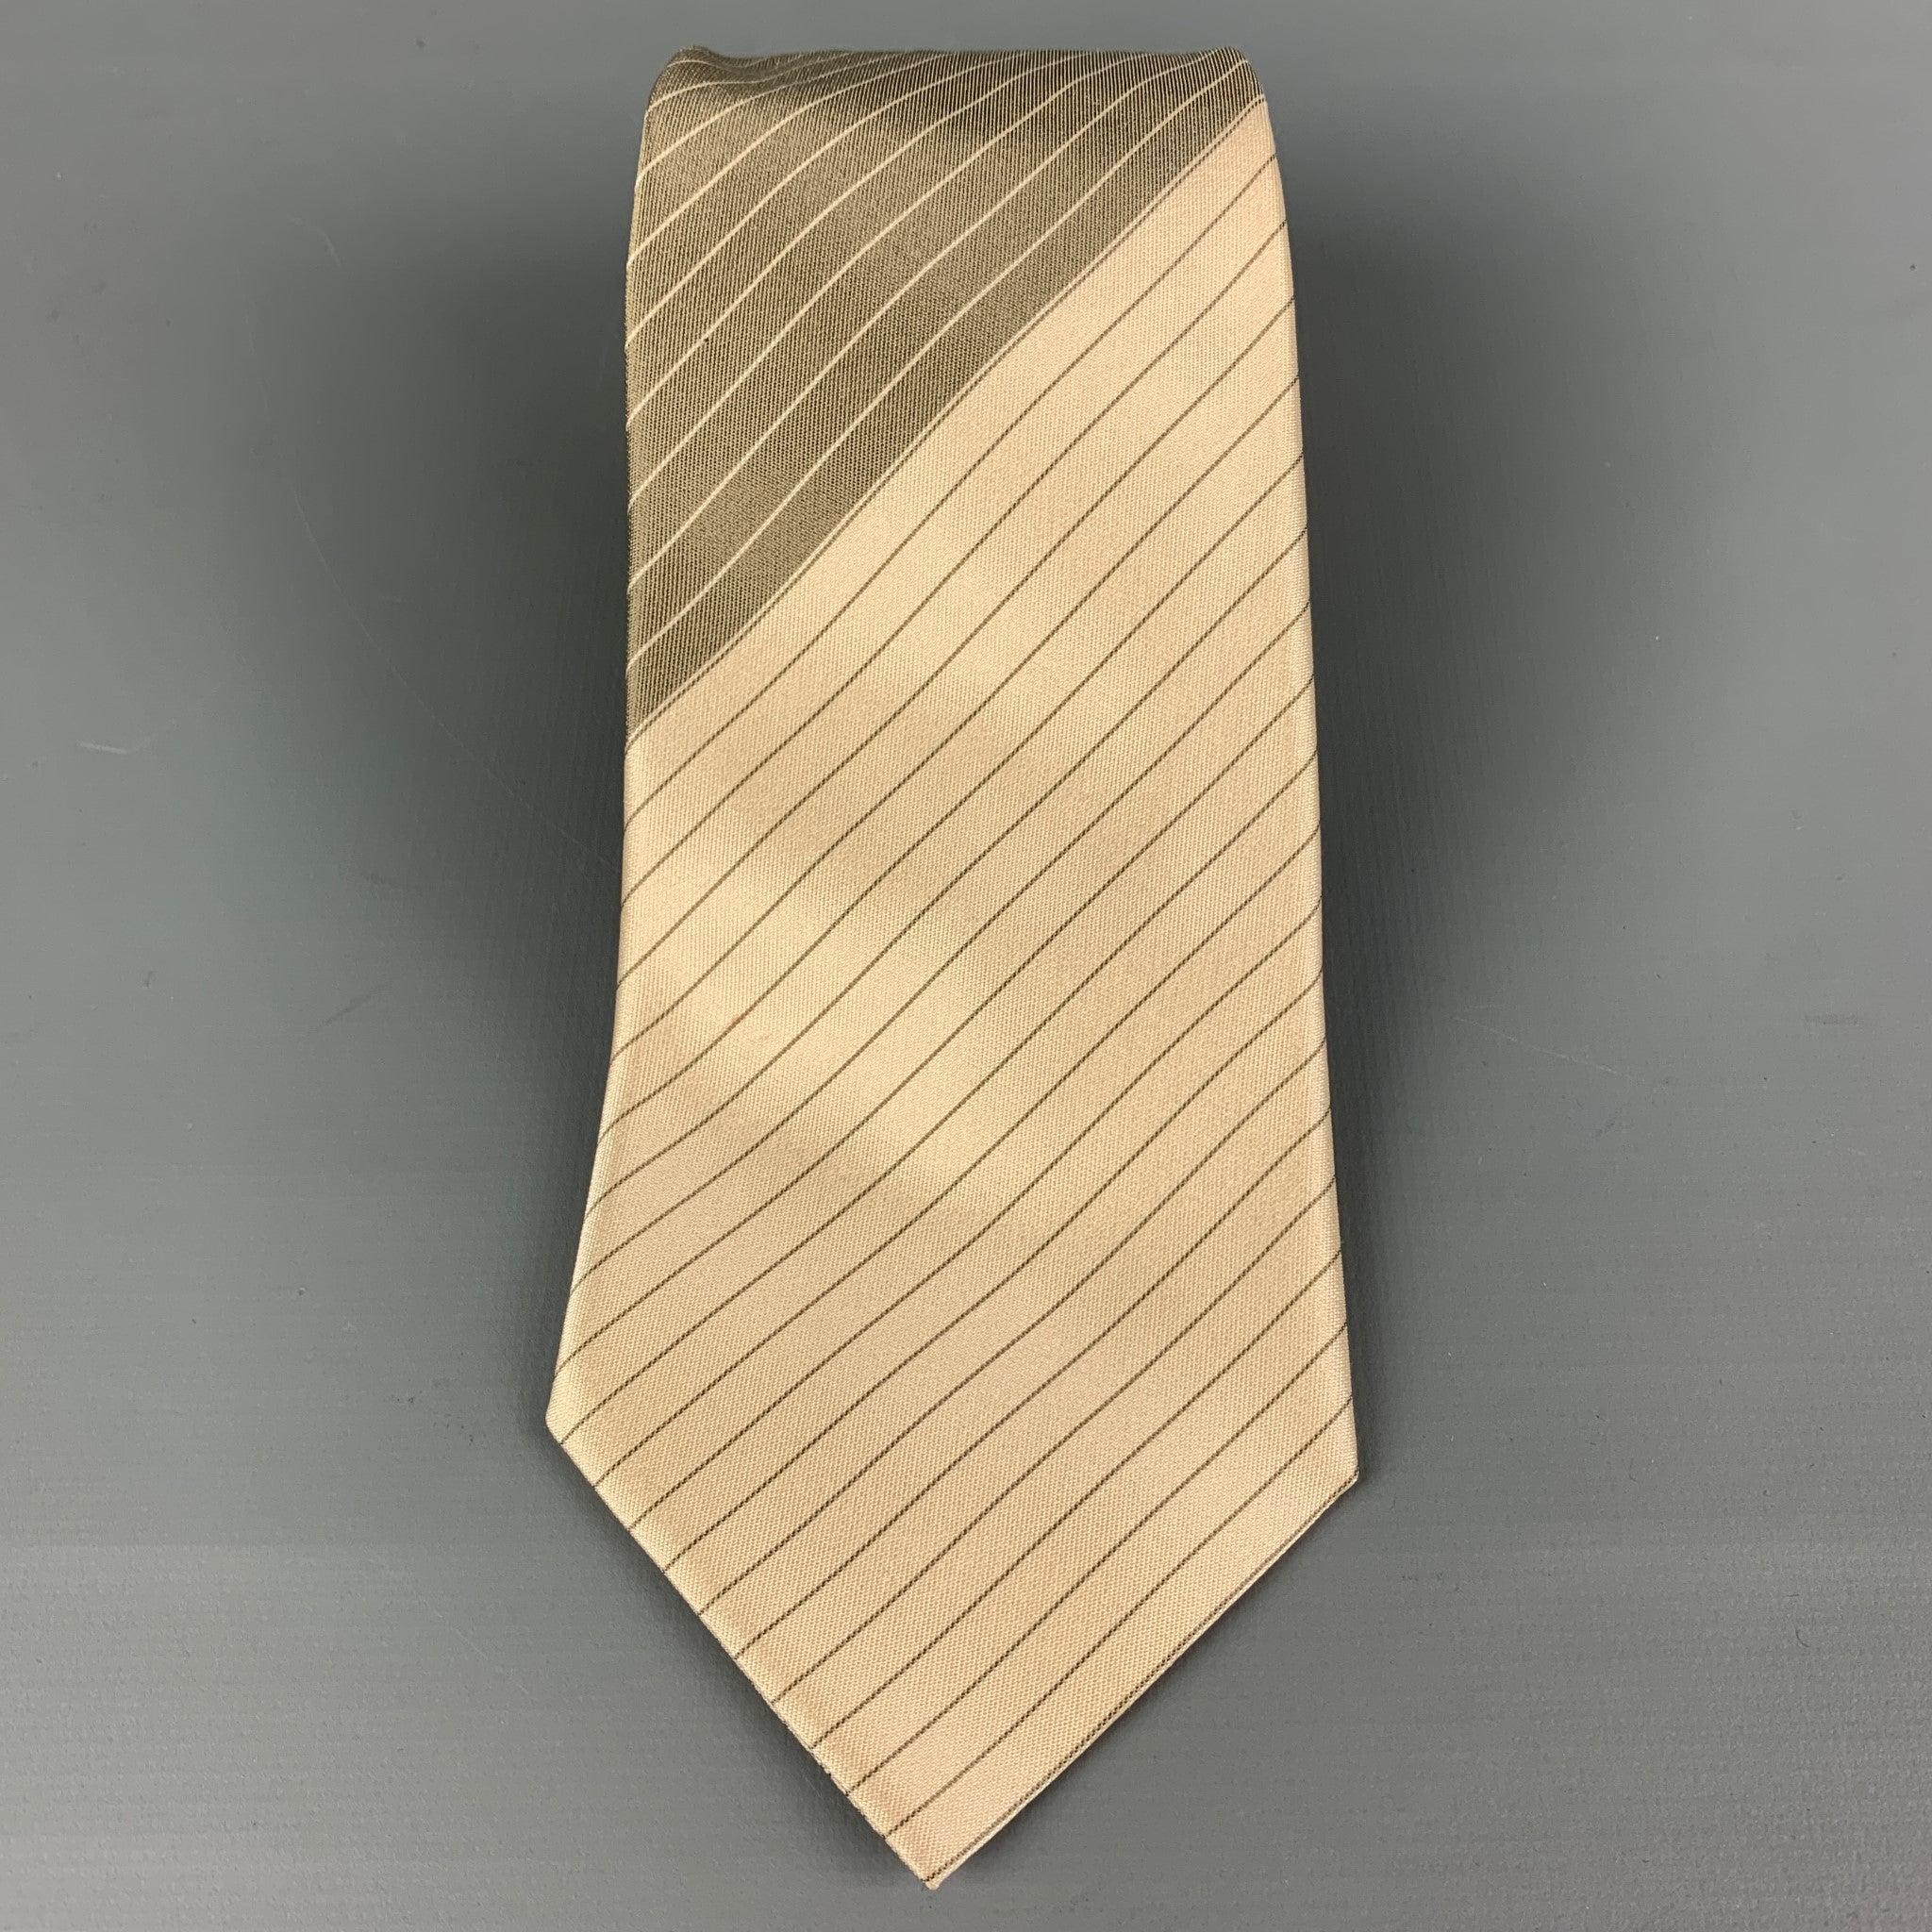 JIL SANDER
 necktie comes in a beige & grey silk twill with a all over diagonal stripe print. Made in Italy. Very Good Pre-Owned Condition.Width: 3.25 inches 
  
  
  
 Sui Generis Reference: 118898
 Category: Tie
 More Details
  
 Brand: JIL